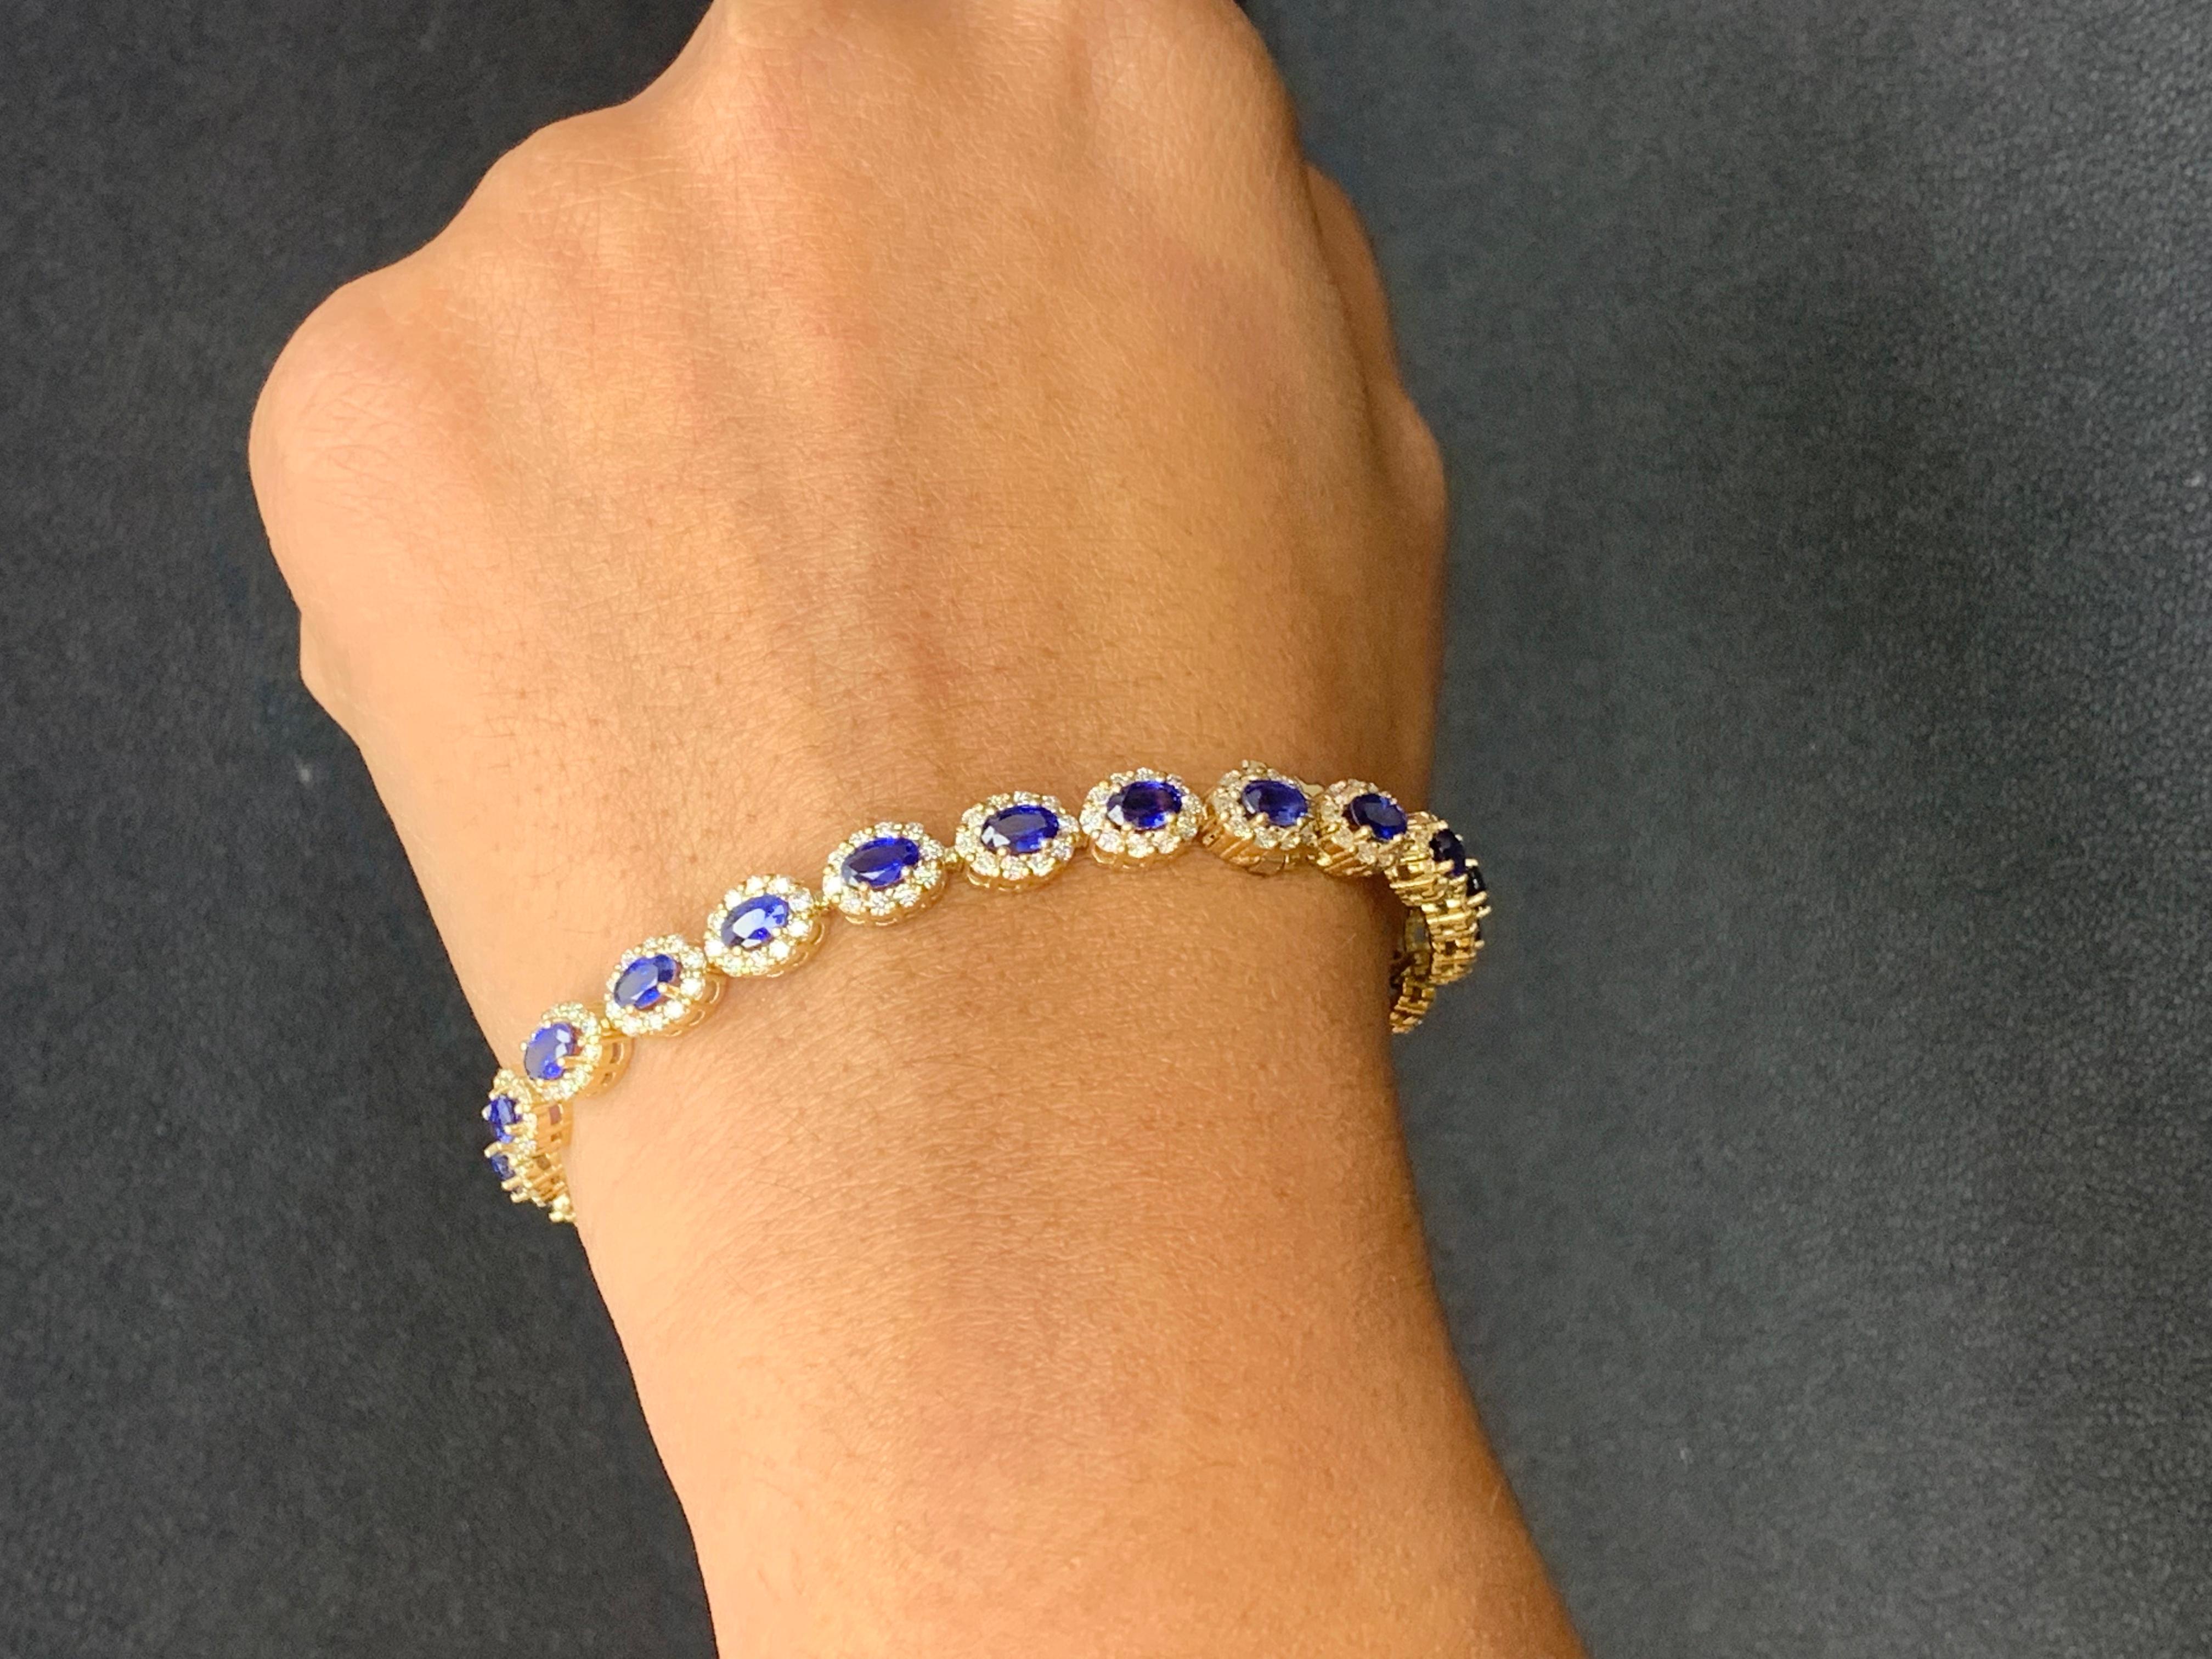 Modern 6.24 Carat Oval Cut Blue Sapphire and Diamond Halo Bracelet in 14K Yellow Gold For Sale